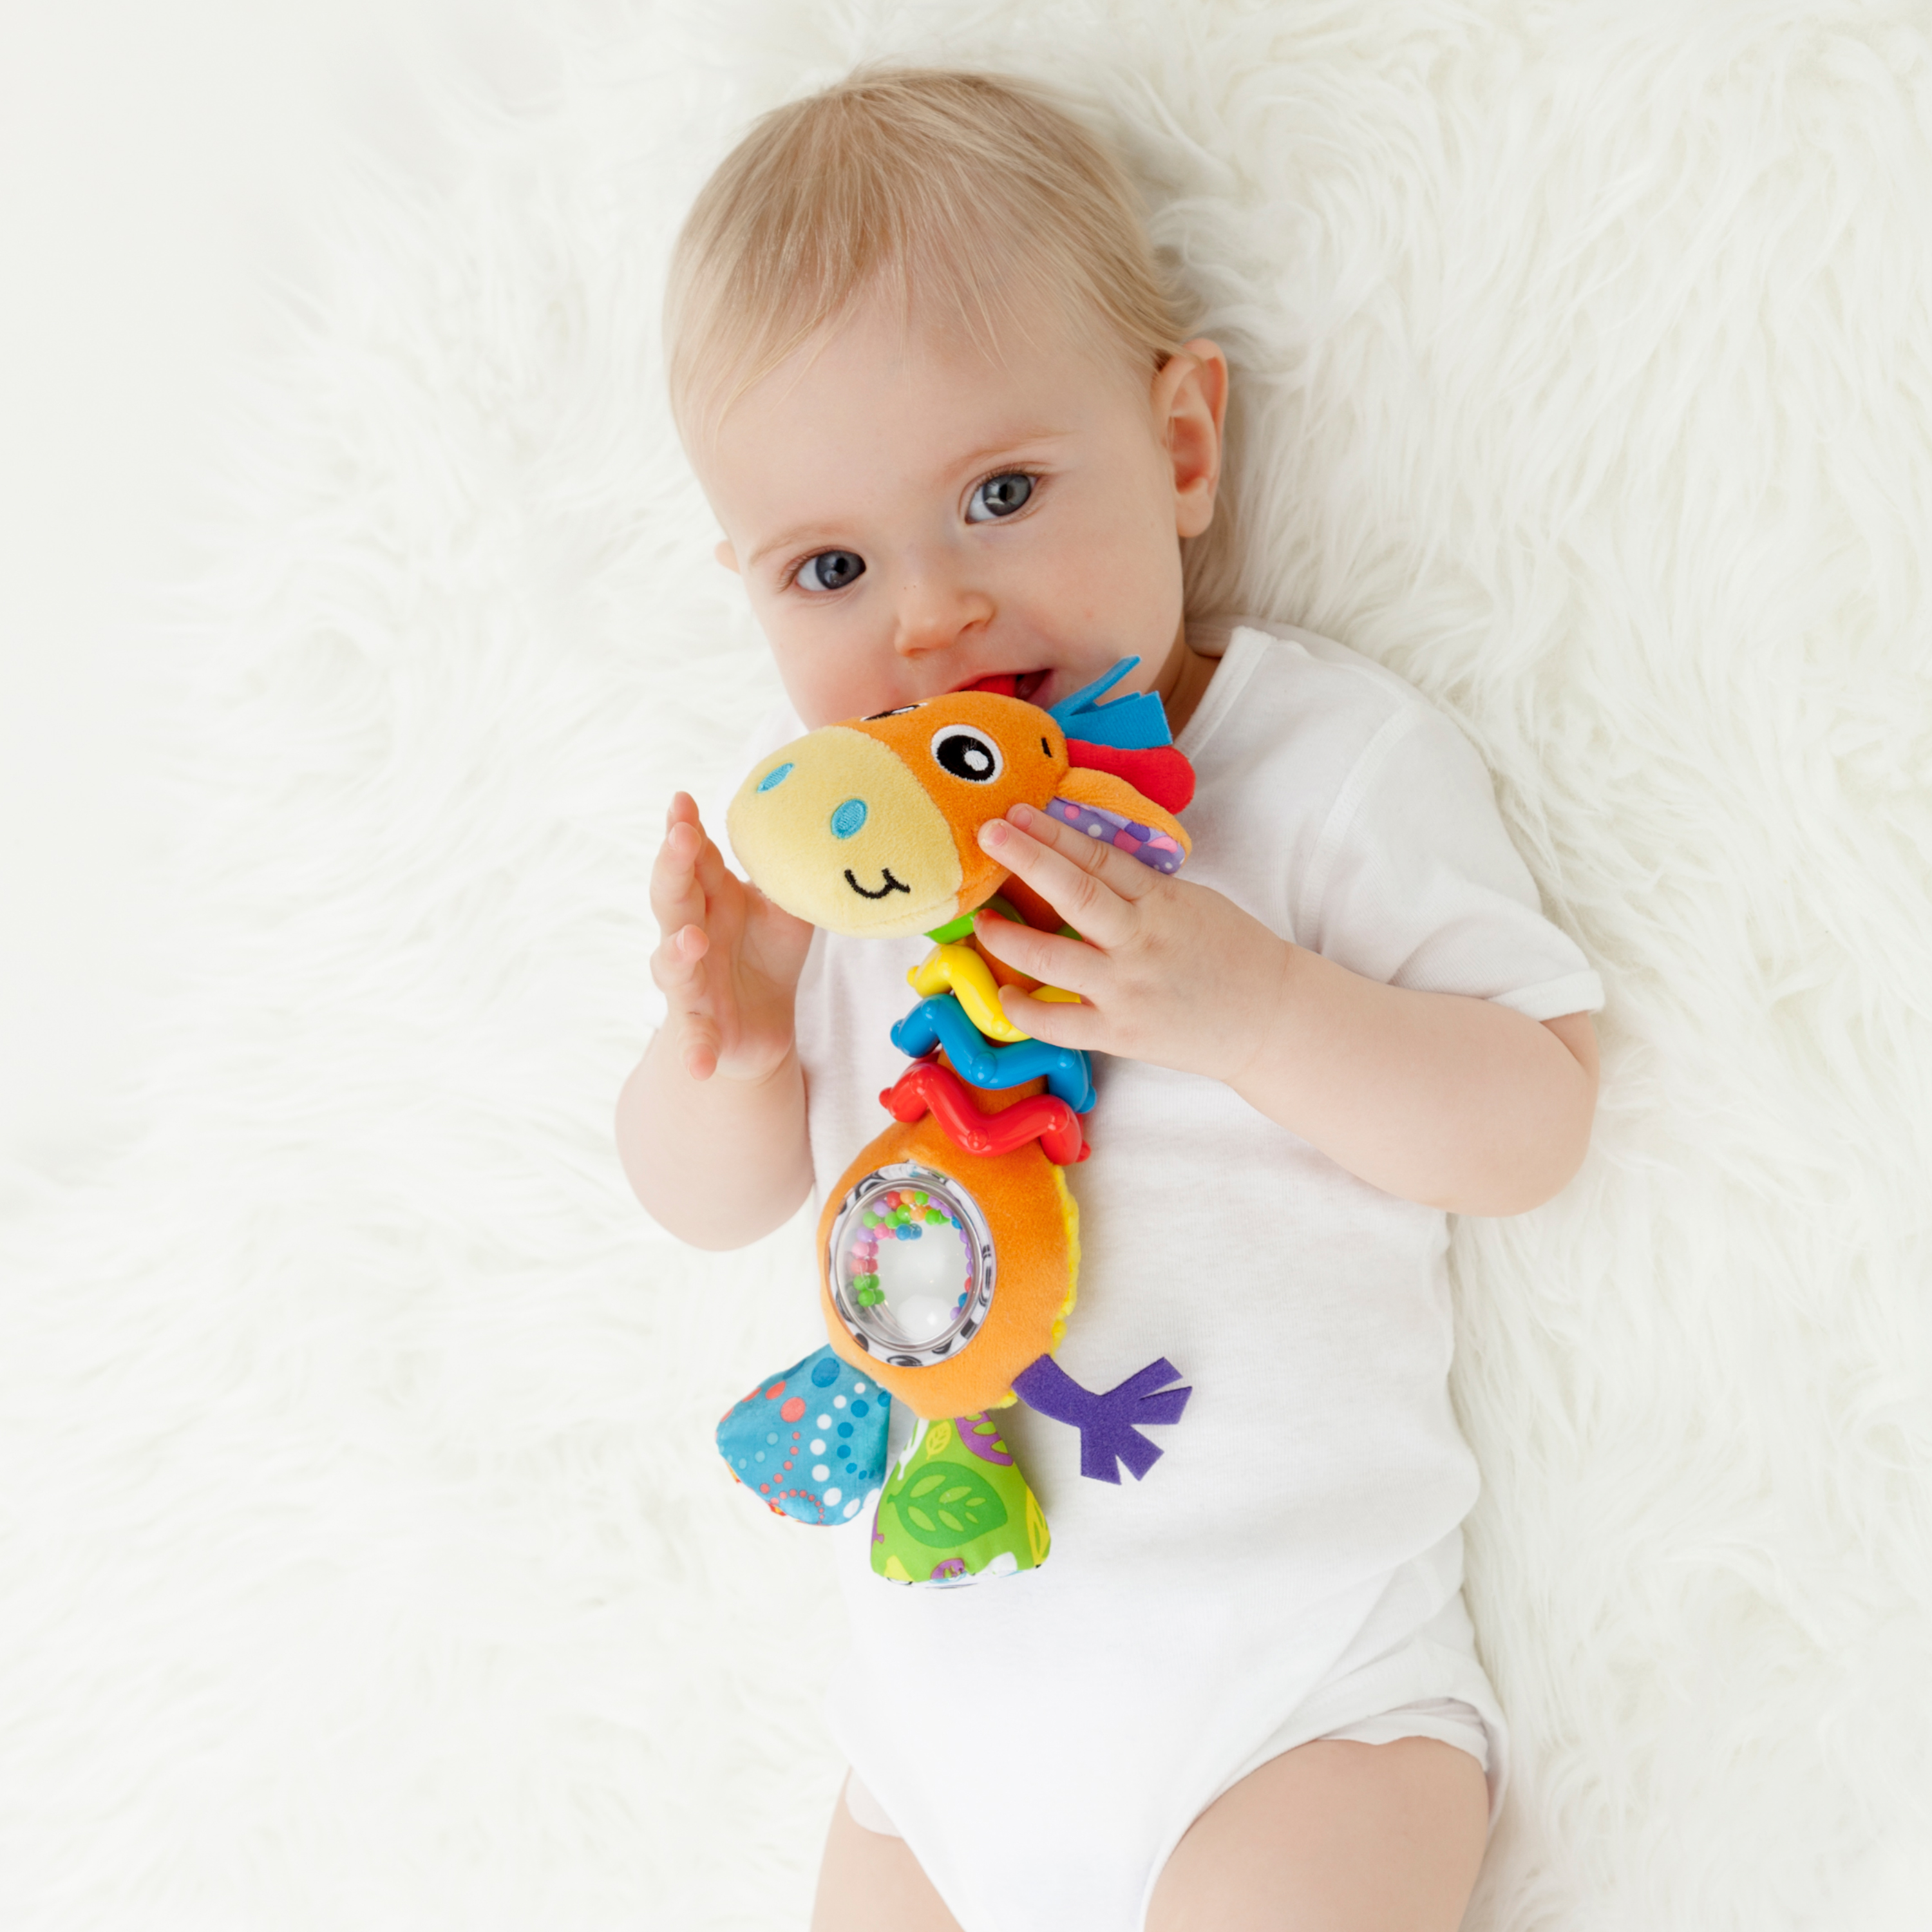 Playgro's Best Gift Set, 2-in-1 Baby Toy Bundle with My Bead Buddy Giraffe and Discovery Ball - image 5 of 12